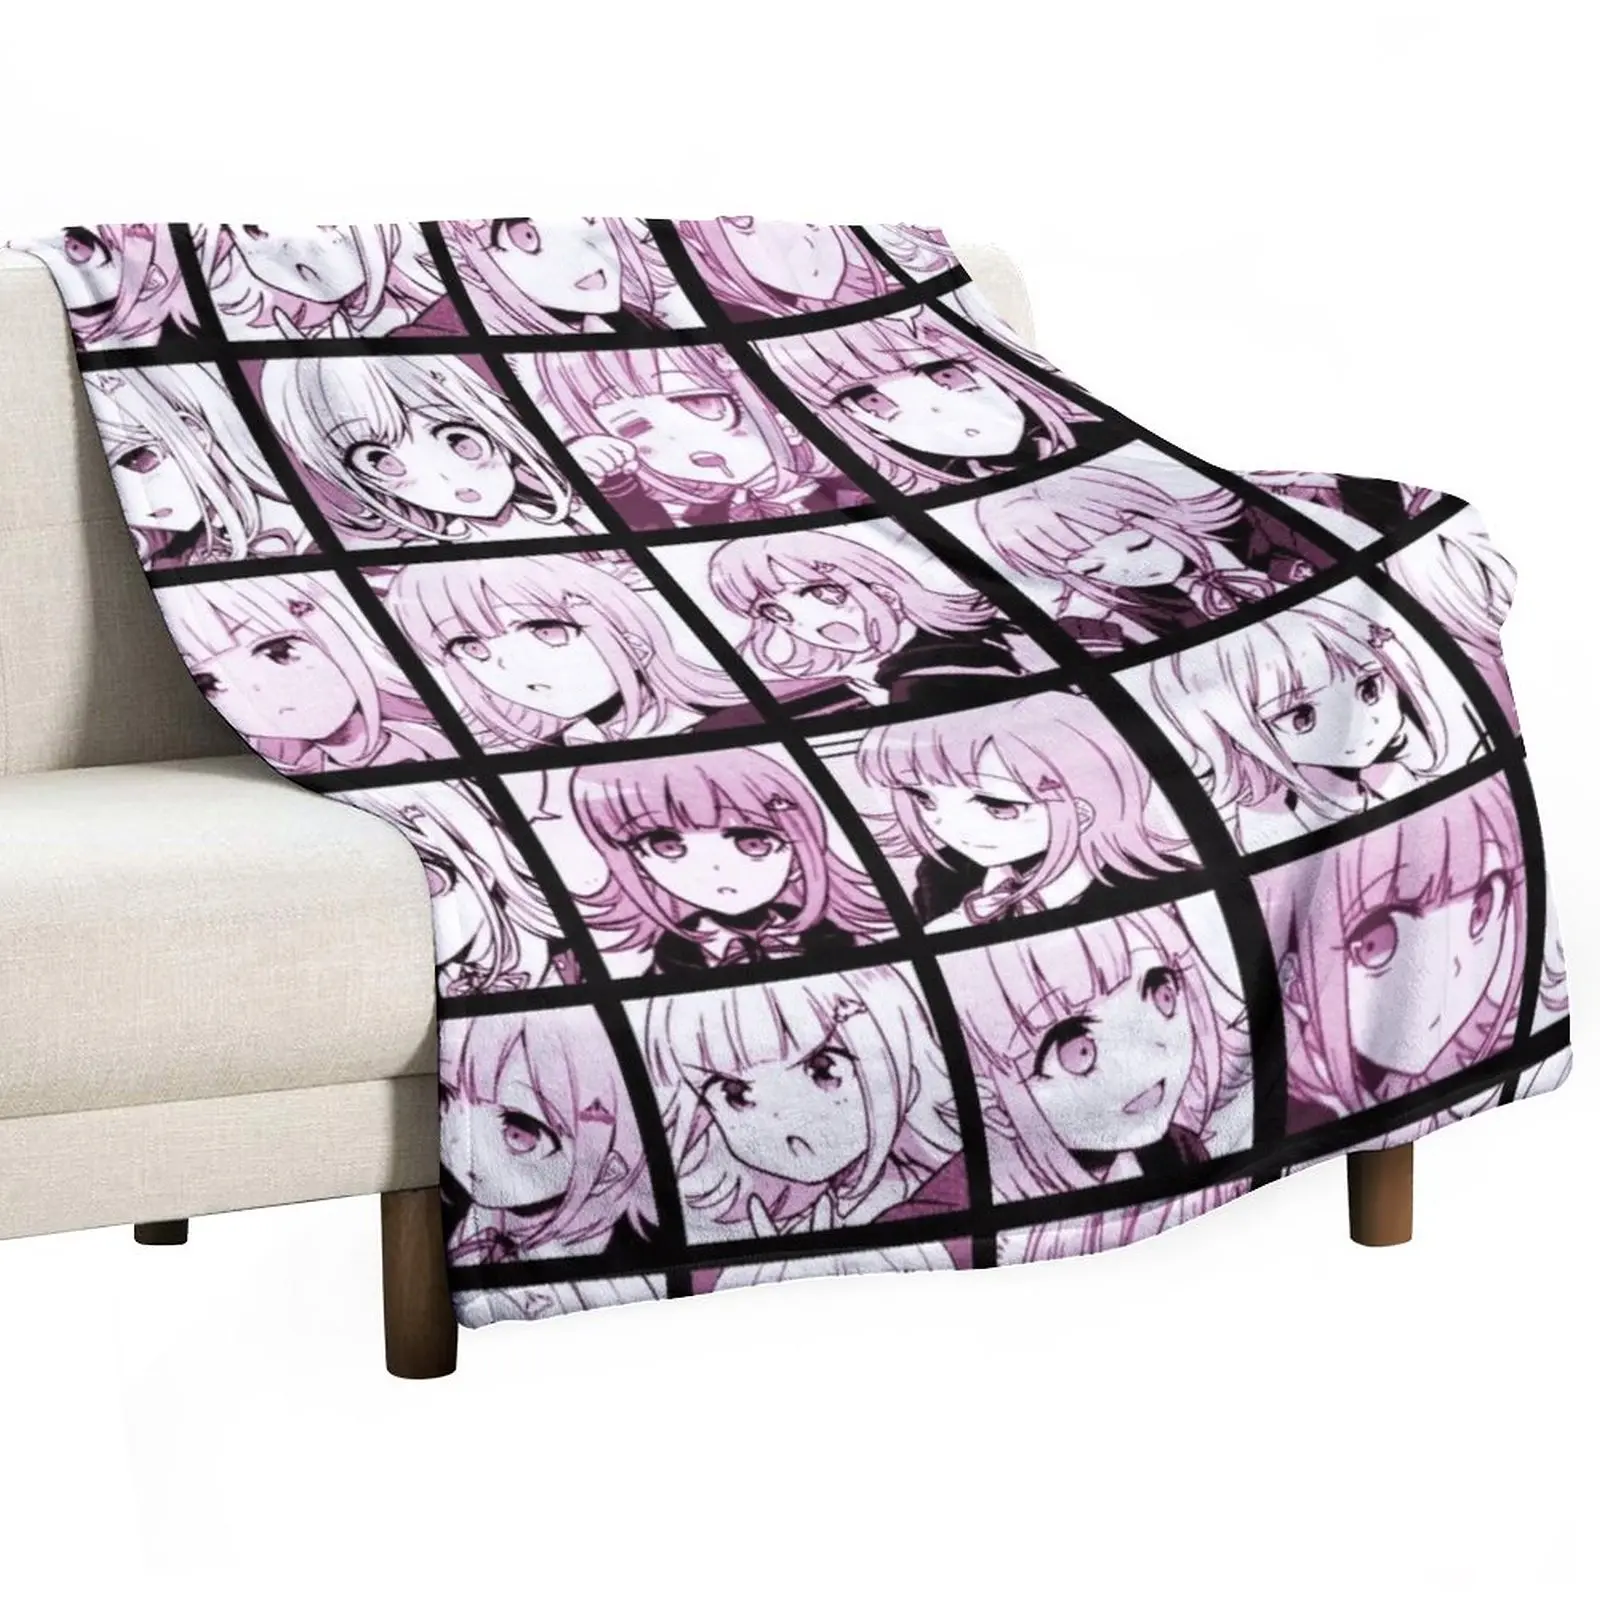 

Chiaki Manga Collection (Colored) Throw Blanket Picnic Heavy wednesday Blankets